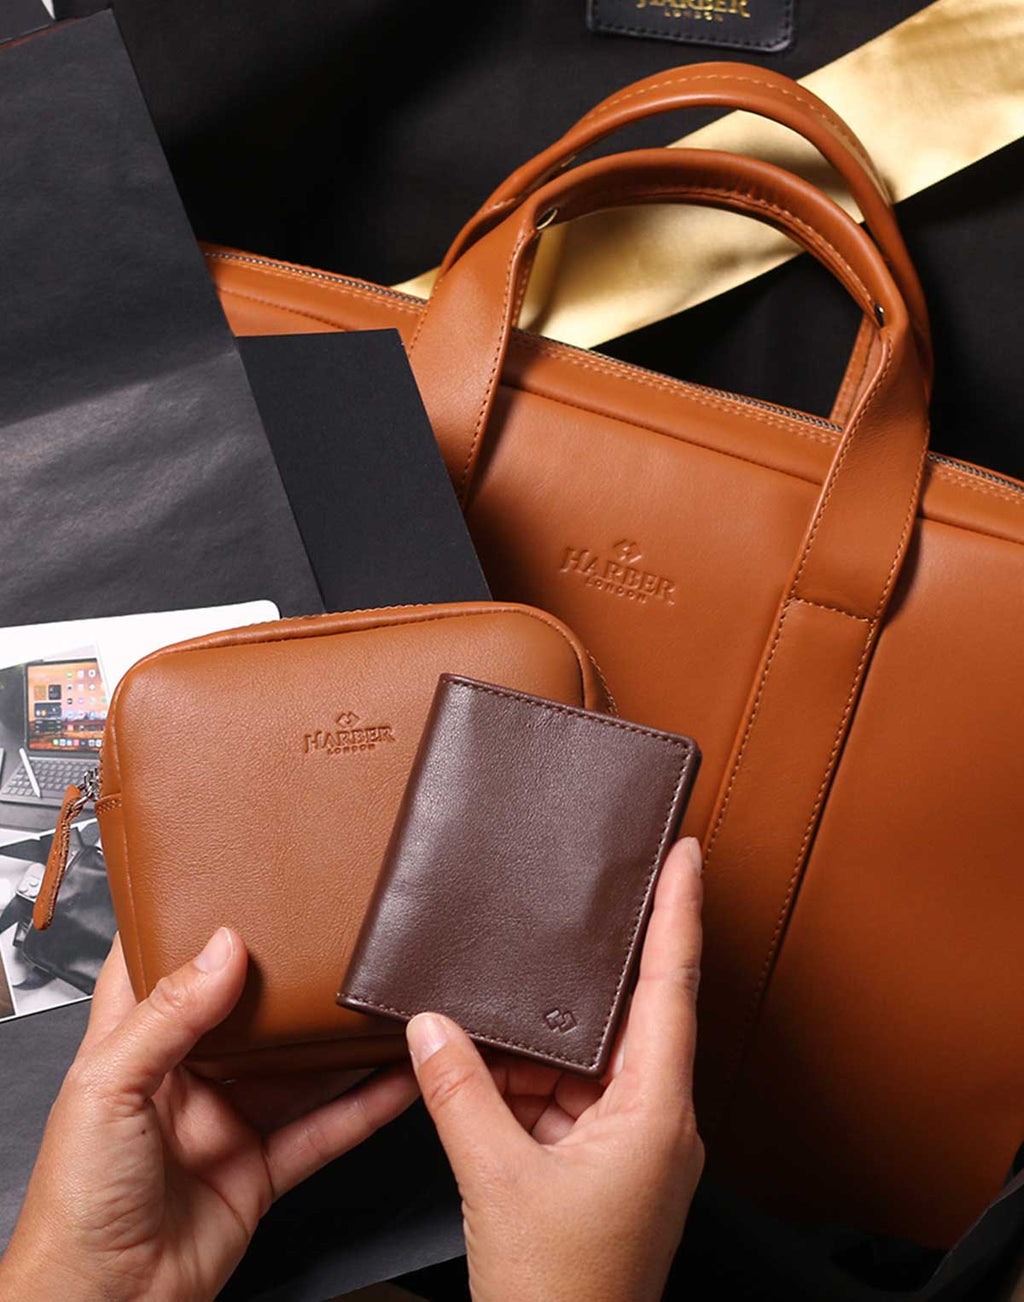 Harber London  Handcrafted leather goods: Wallets, Sleeves & Bags